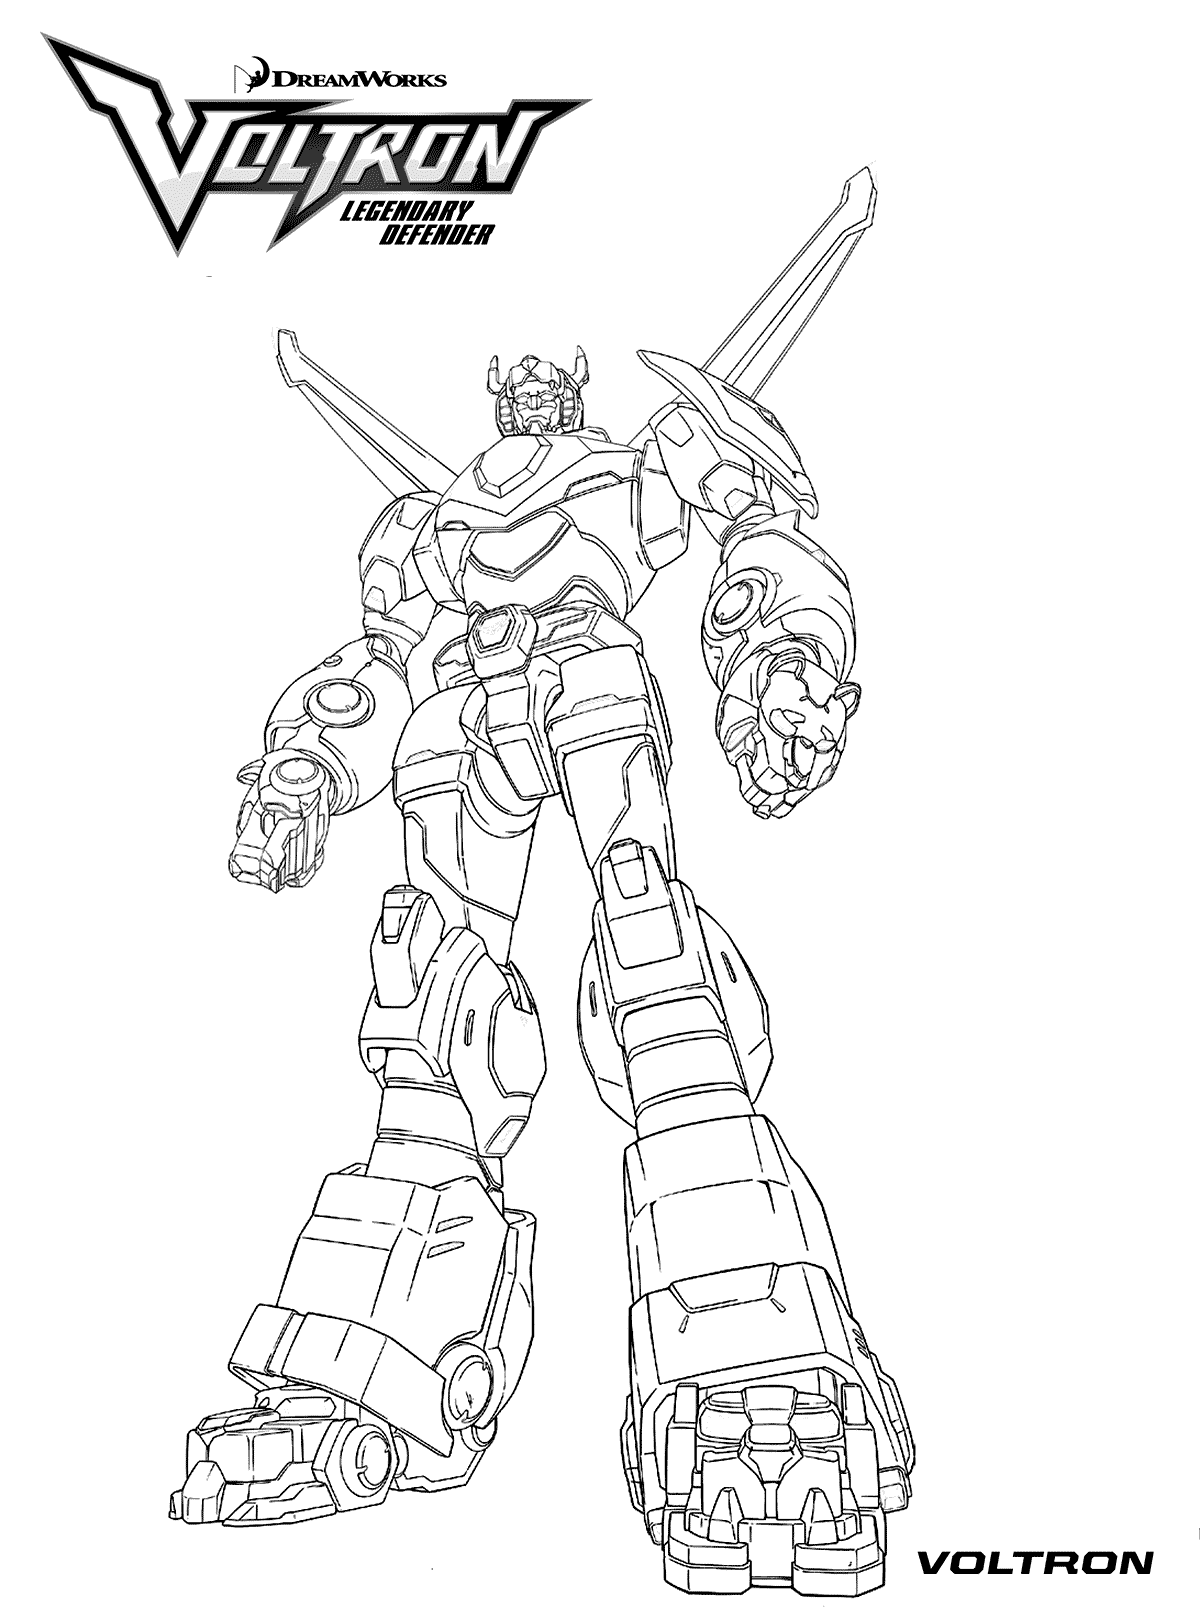 Voltron Coloring Pages Best Coloring Pages For Kids